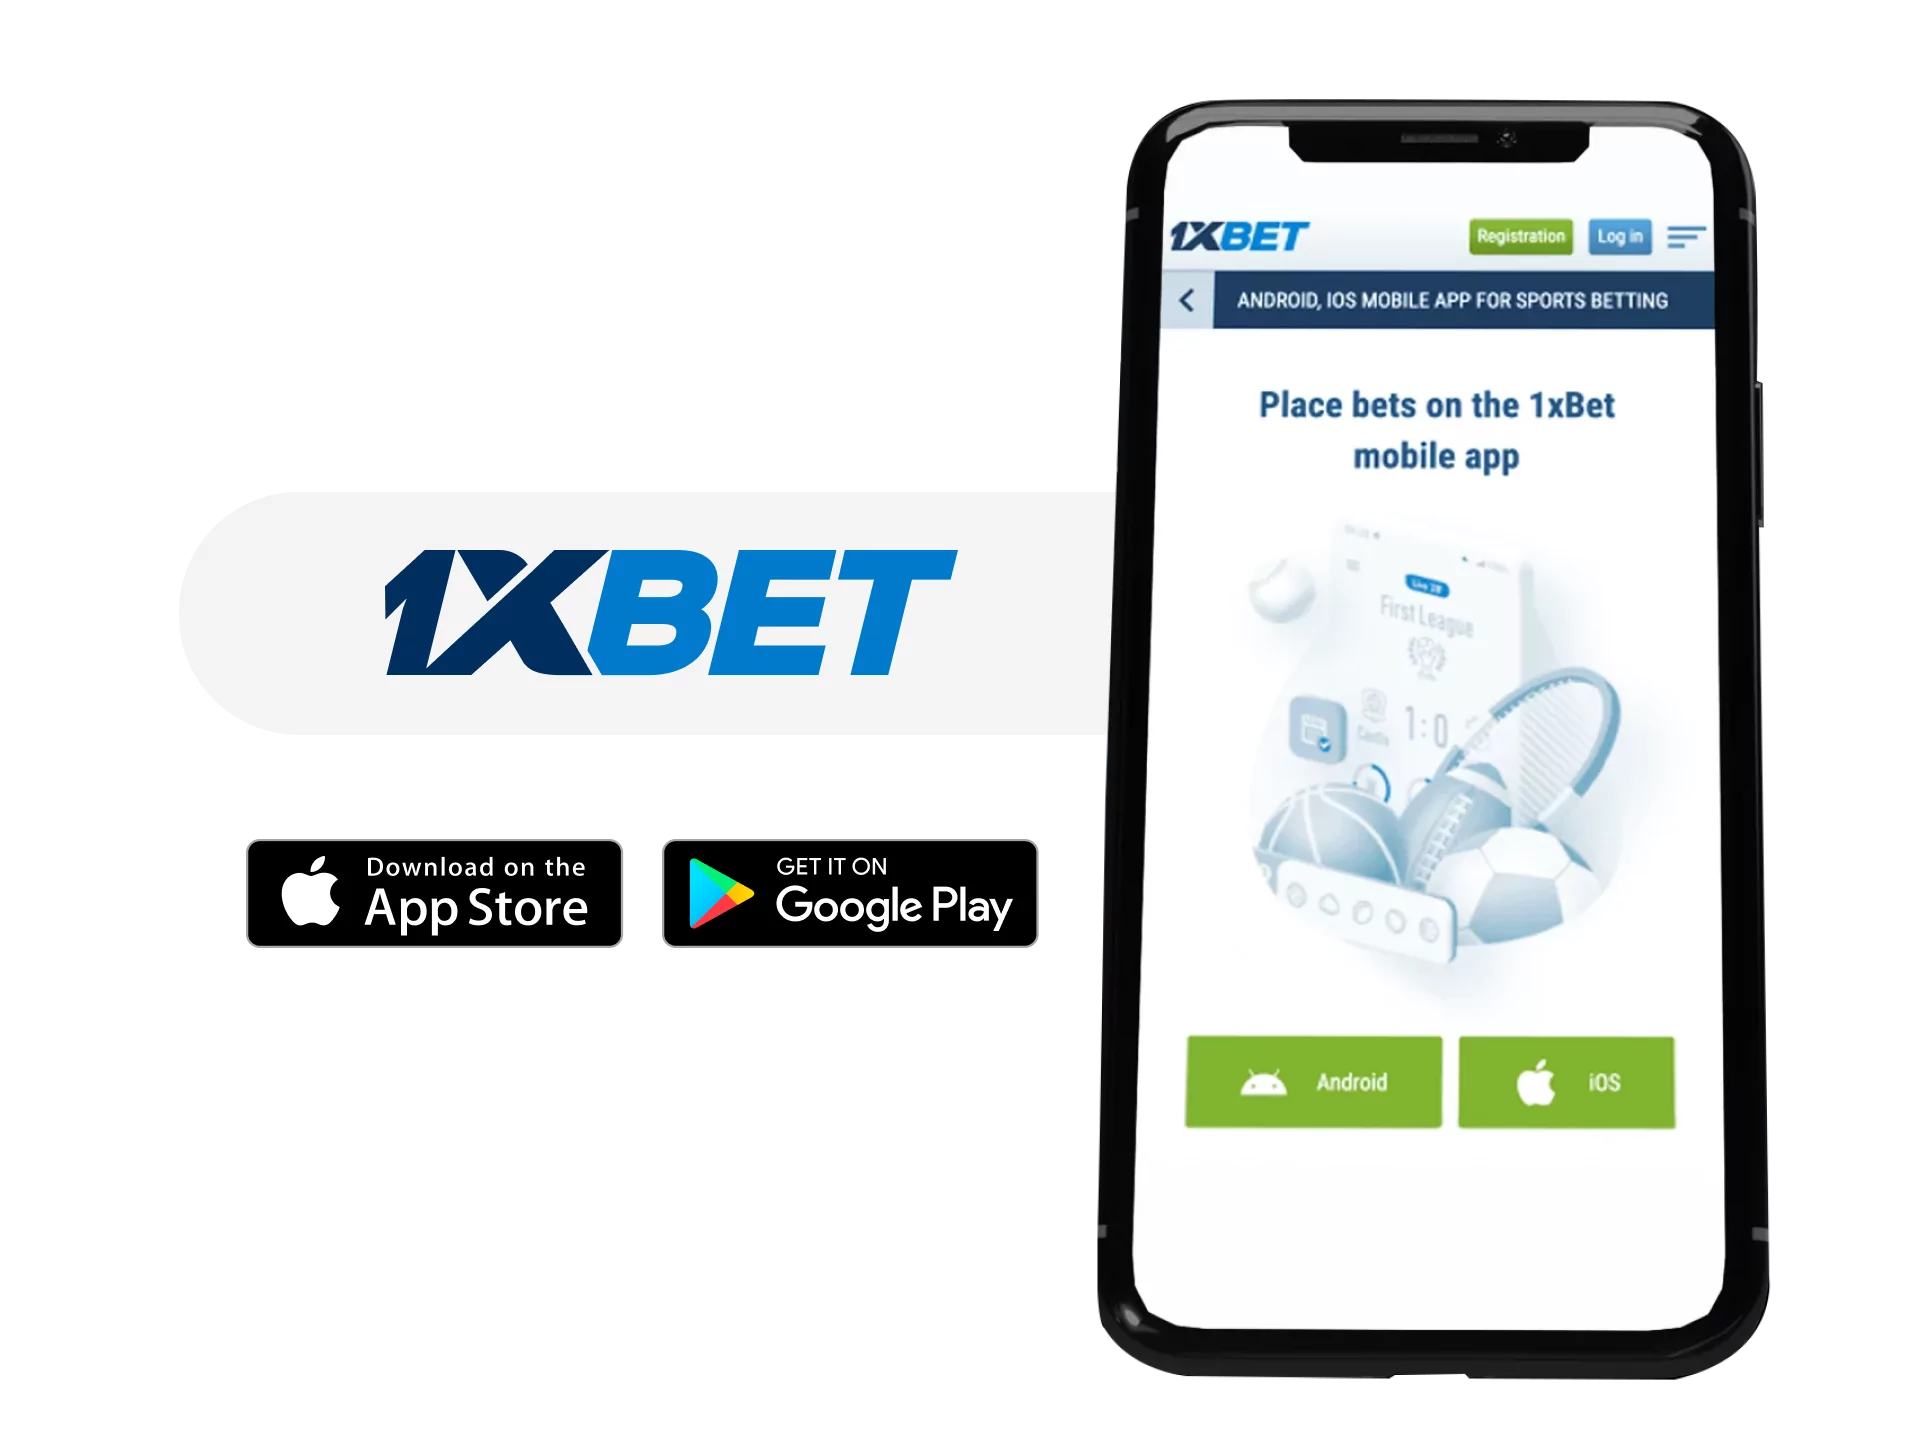 1xbet website with several markets are offered to suit all soccer betting needs.